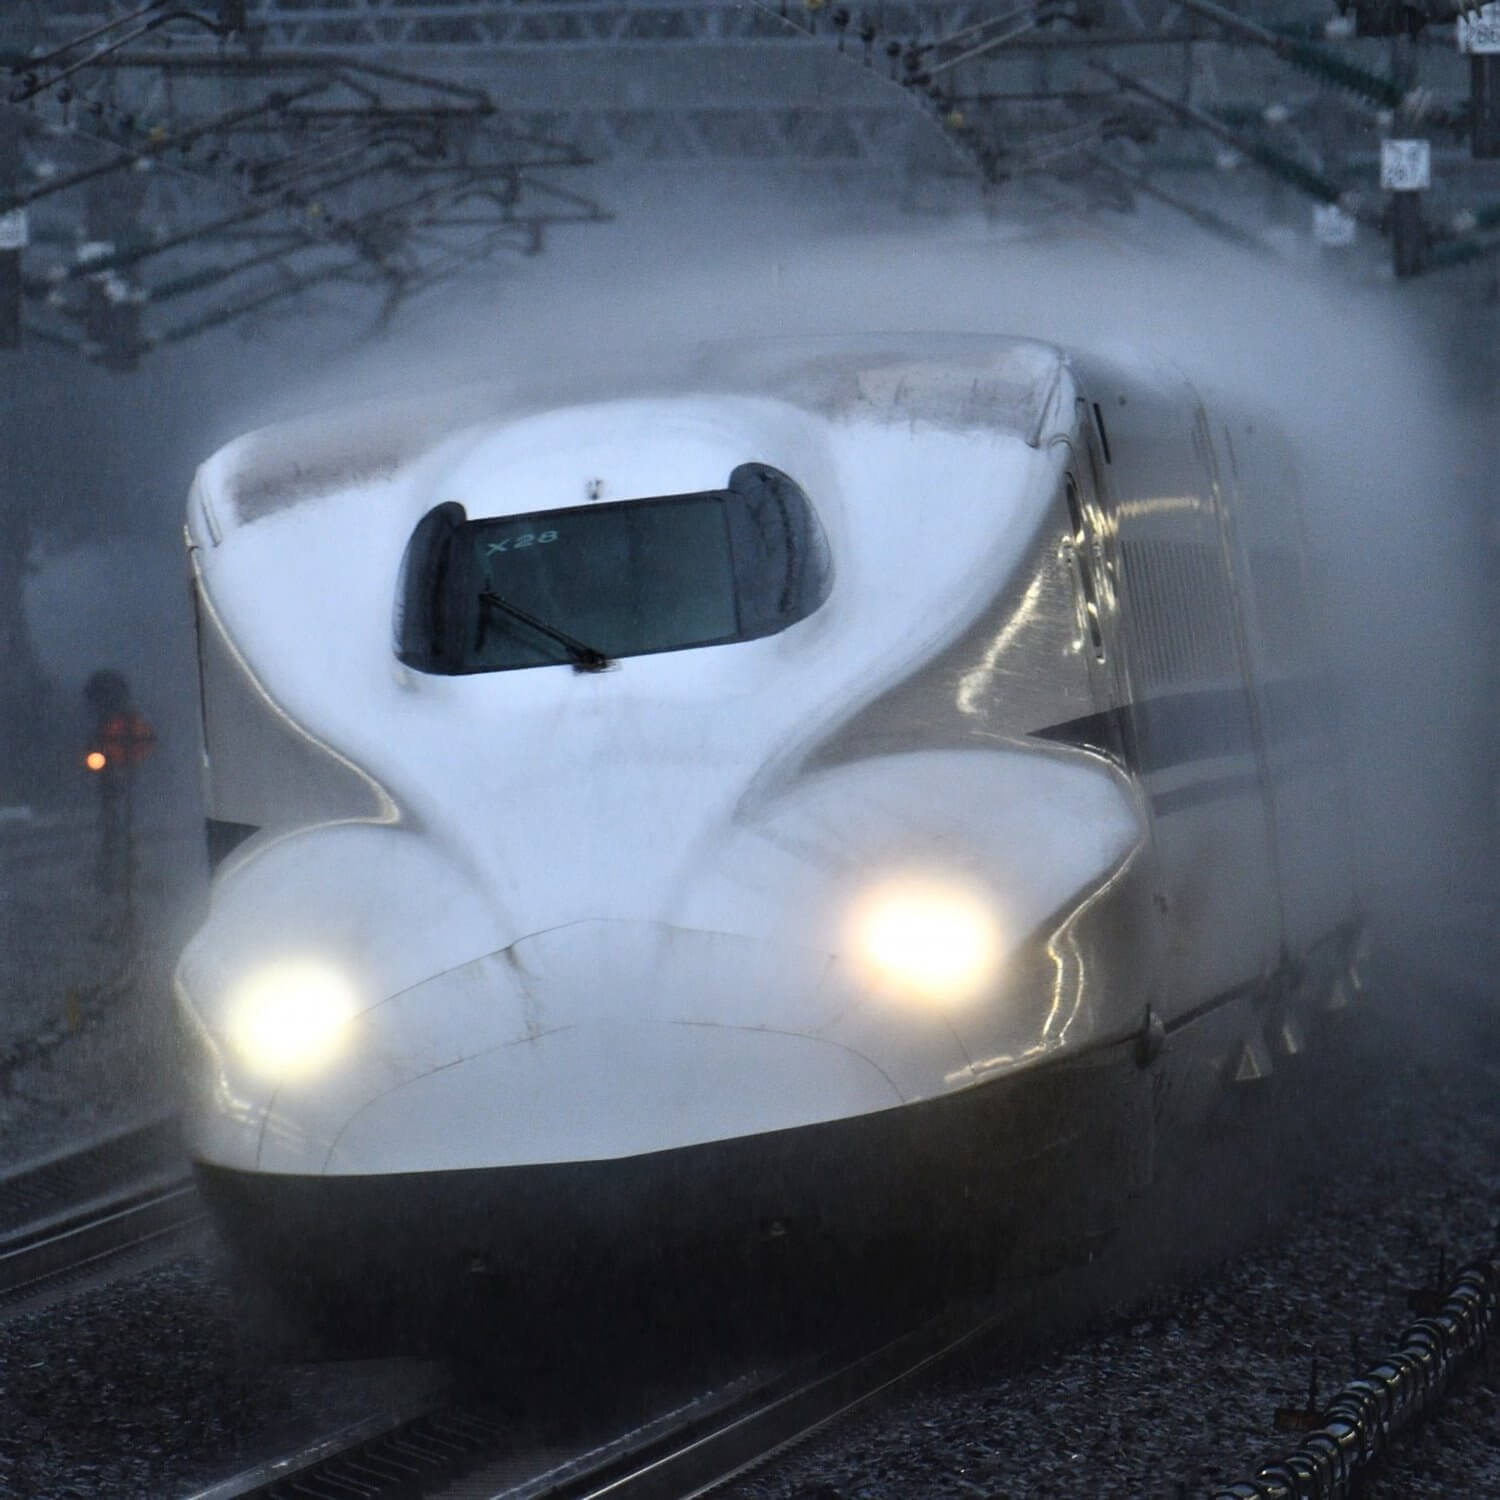 The Shinkansen connects various parts of Japan in accurate time 9